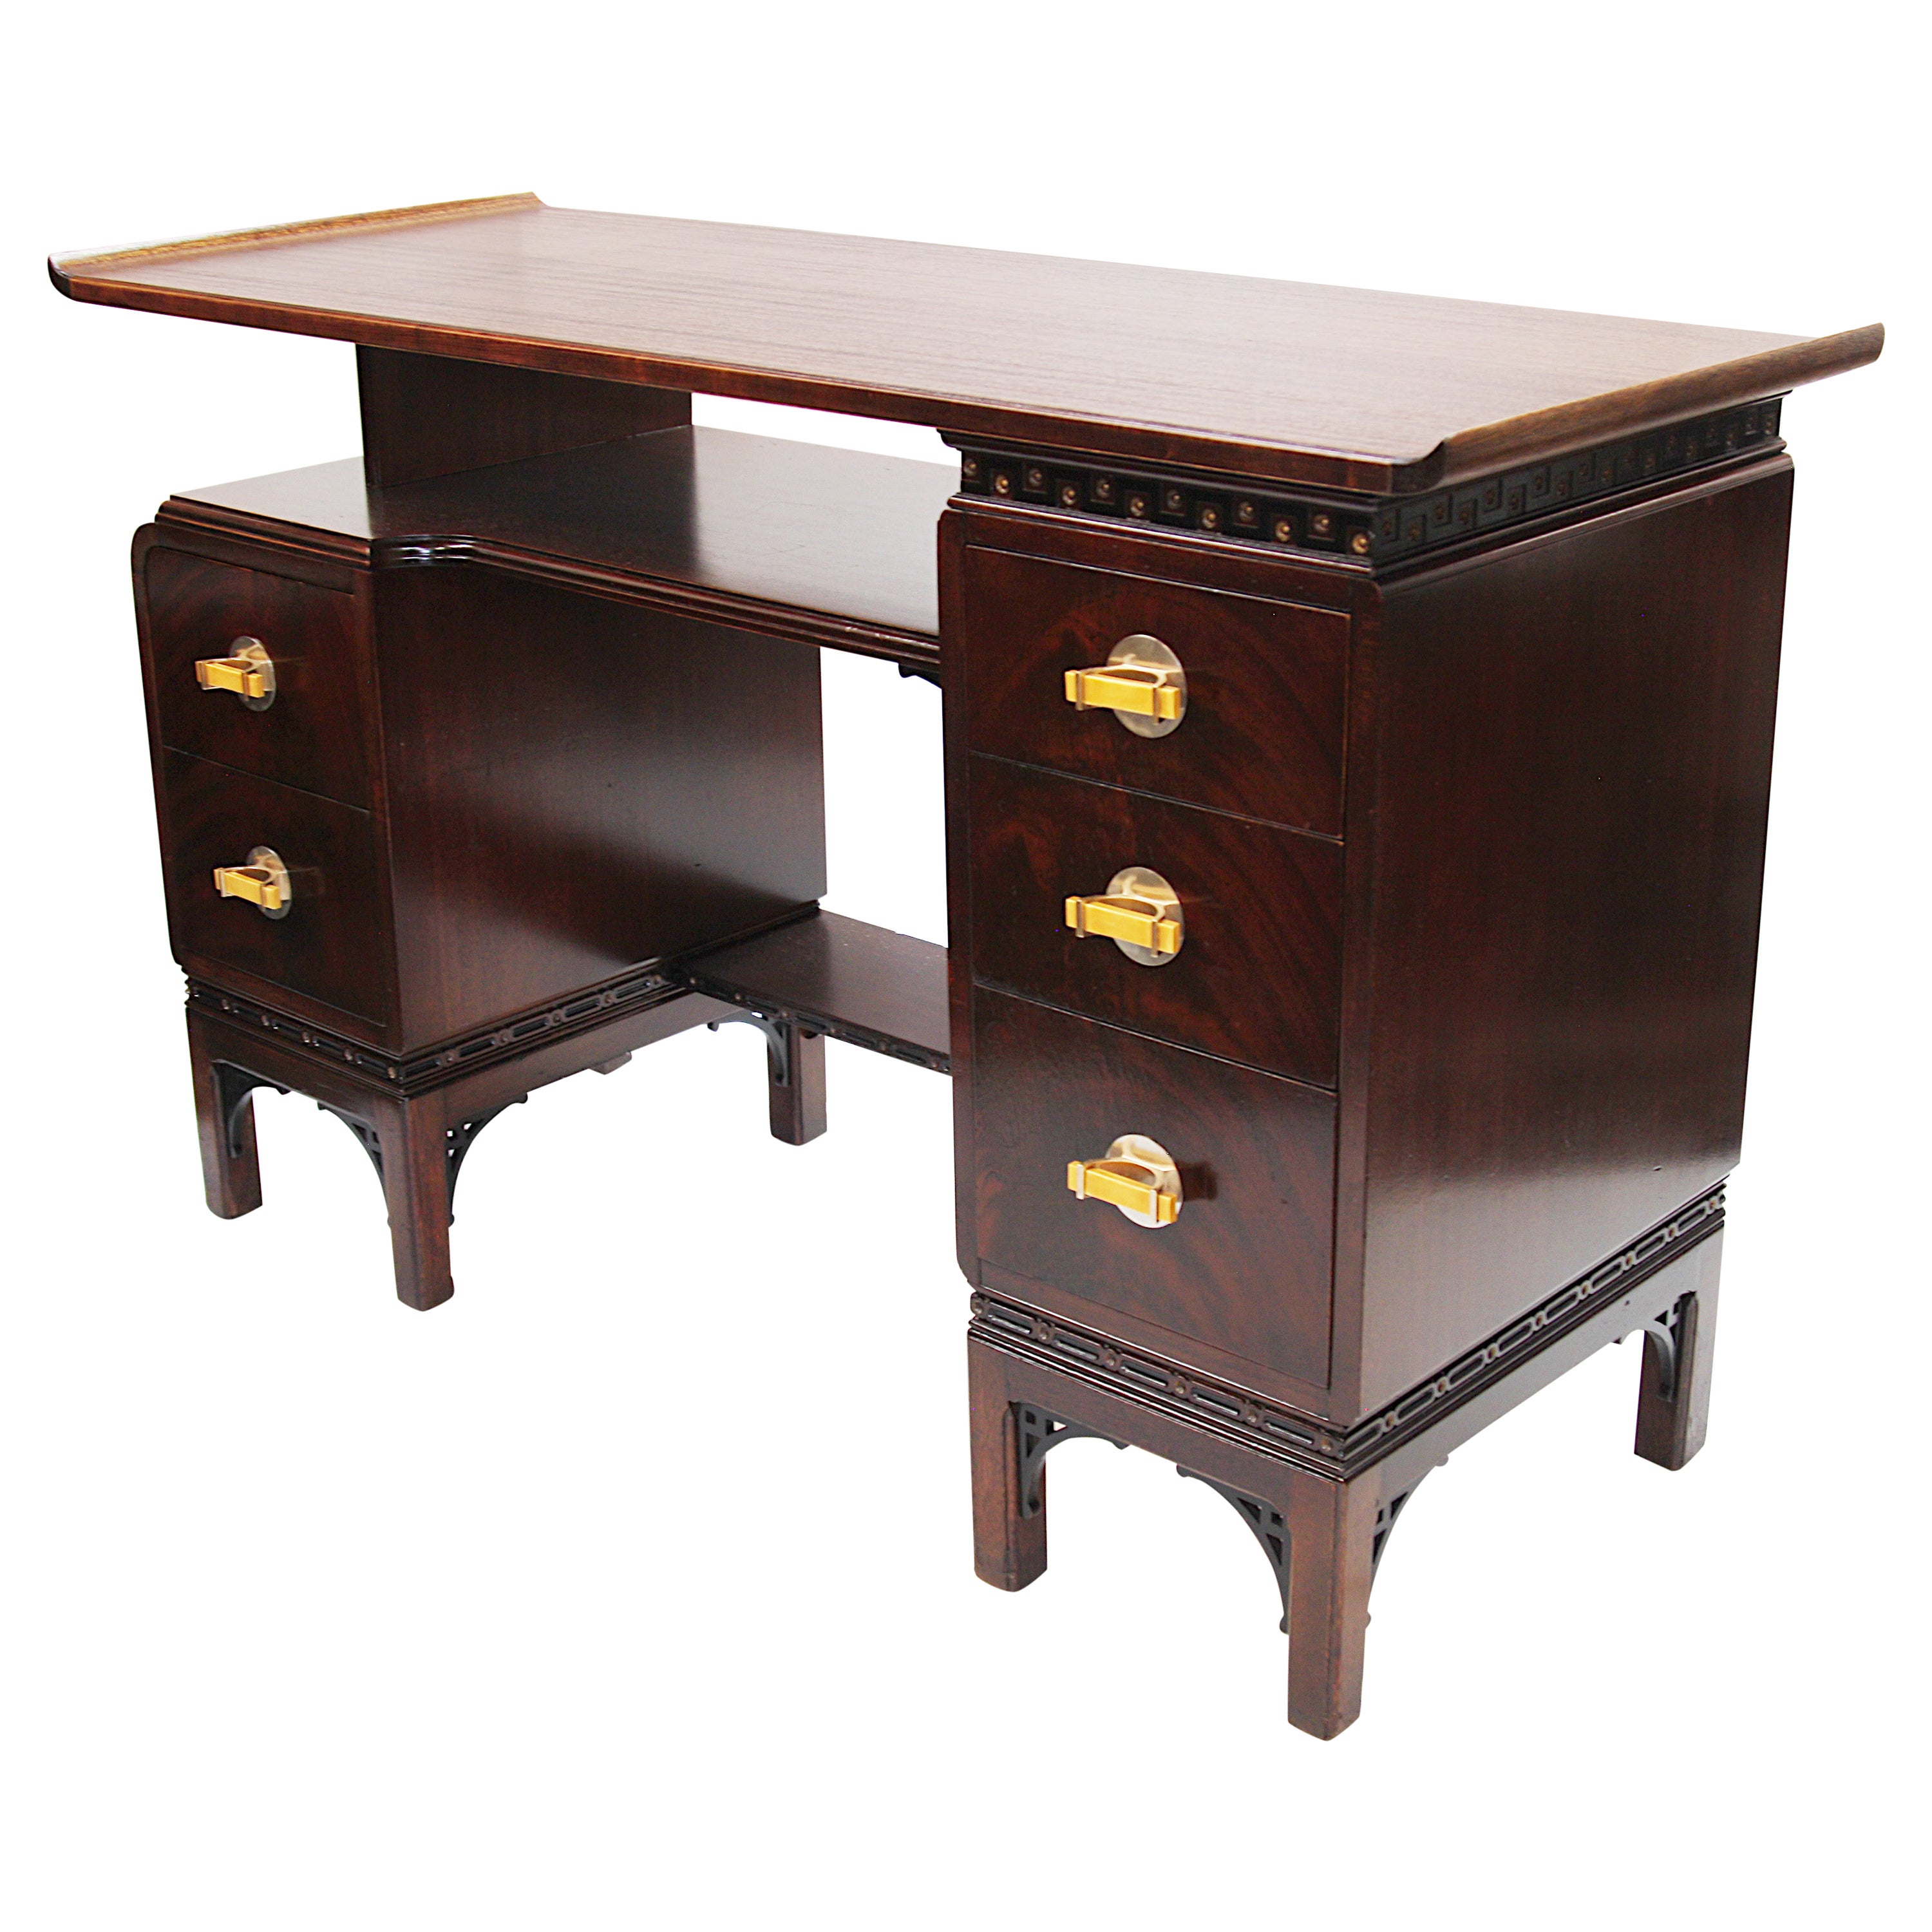 Mid-Century Modern Asian-Influenced Pagoda Desk by The Northern Furniture Co. For Sale